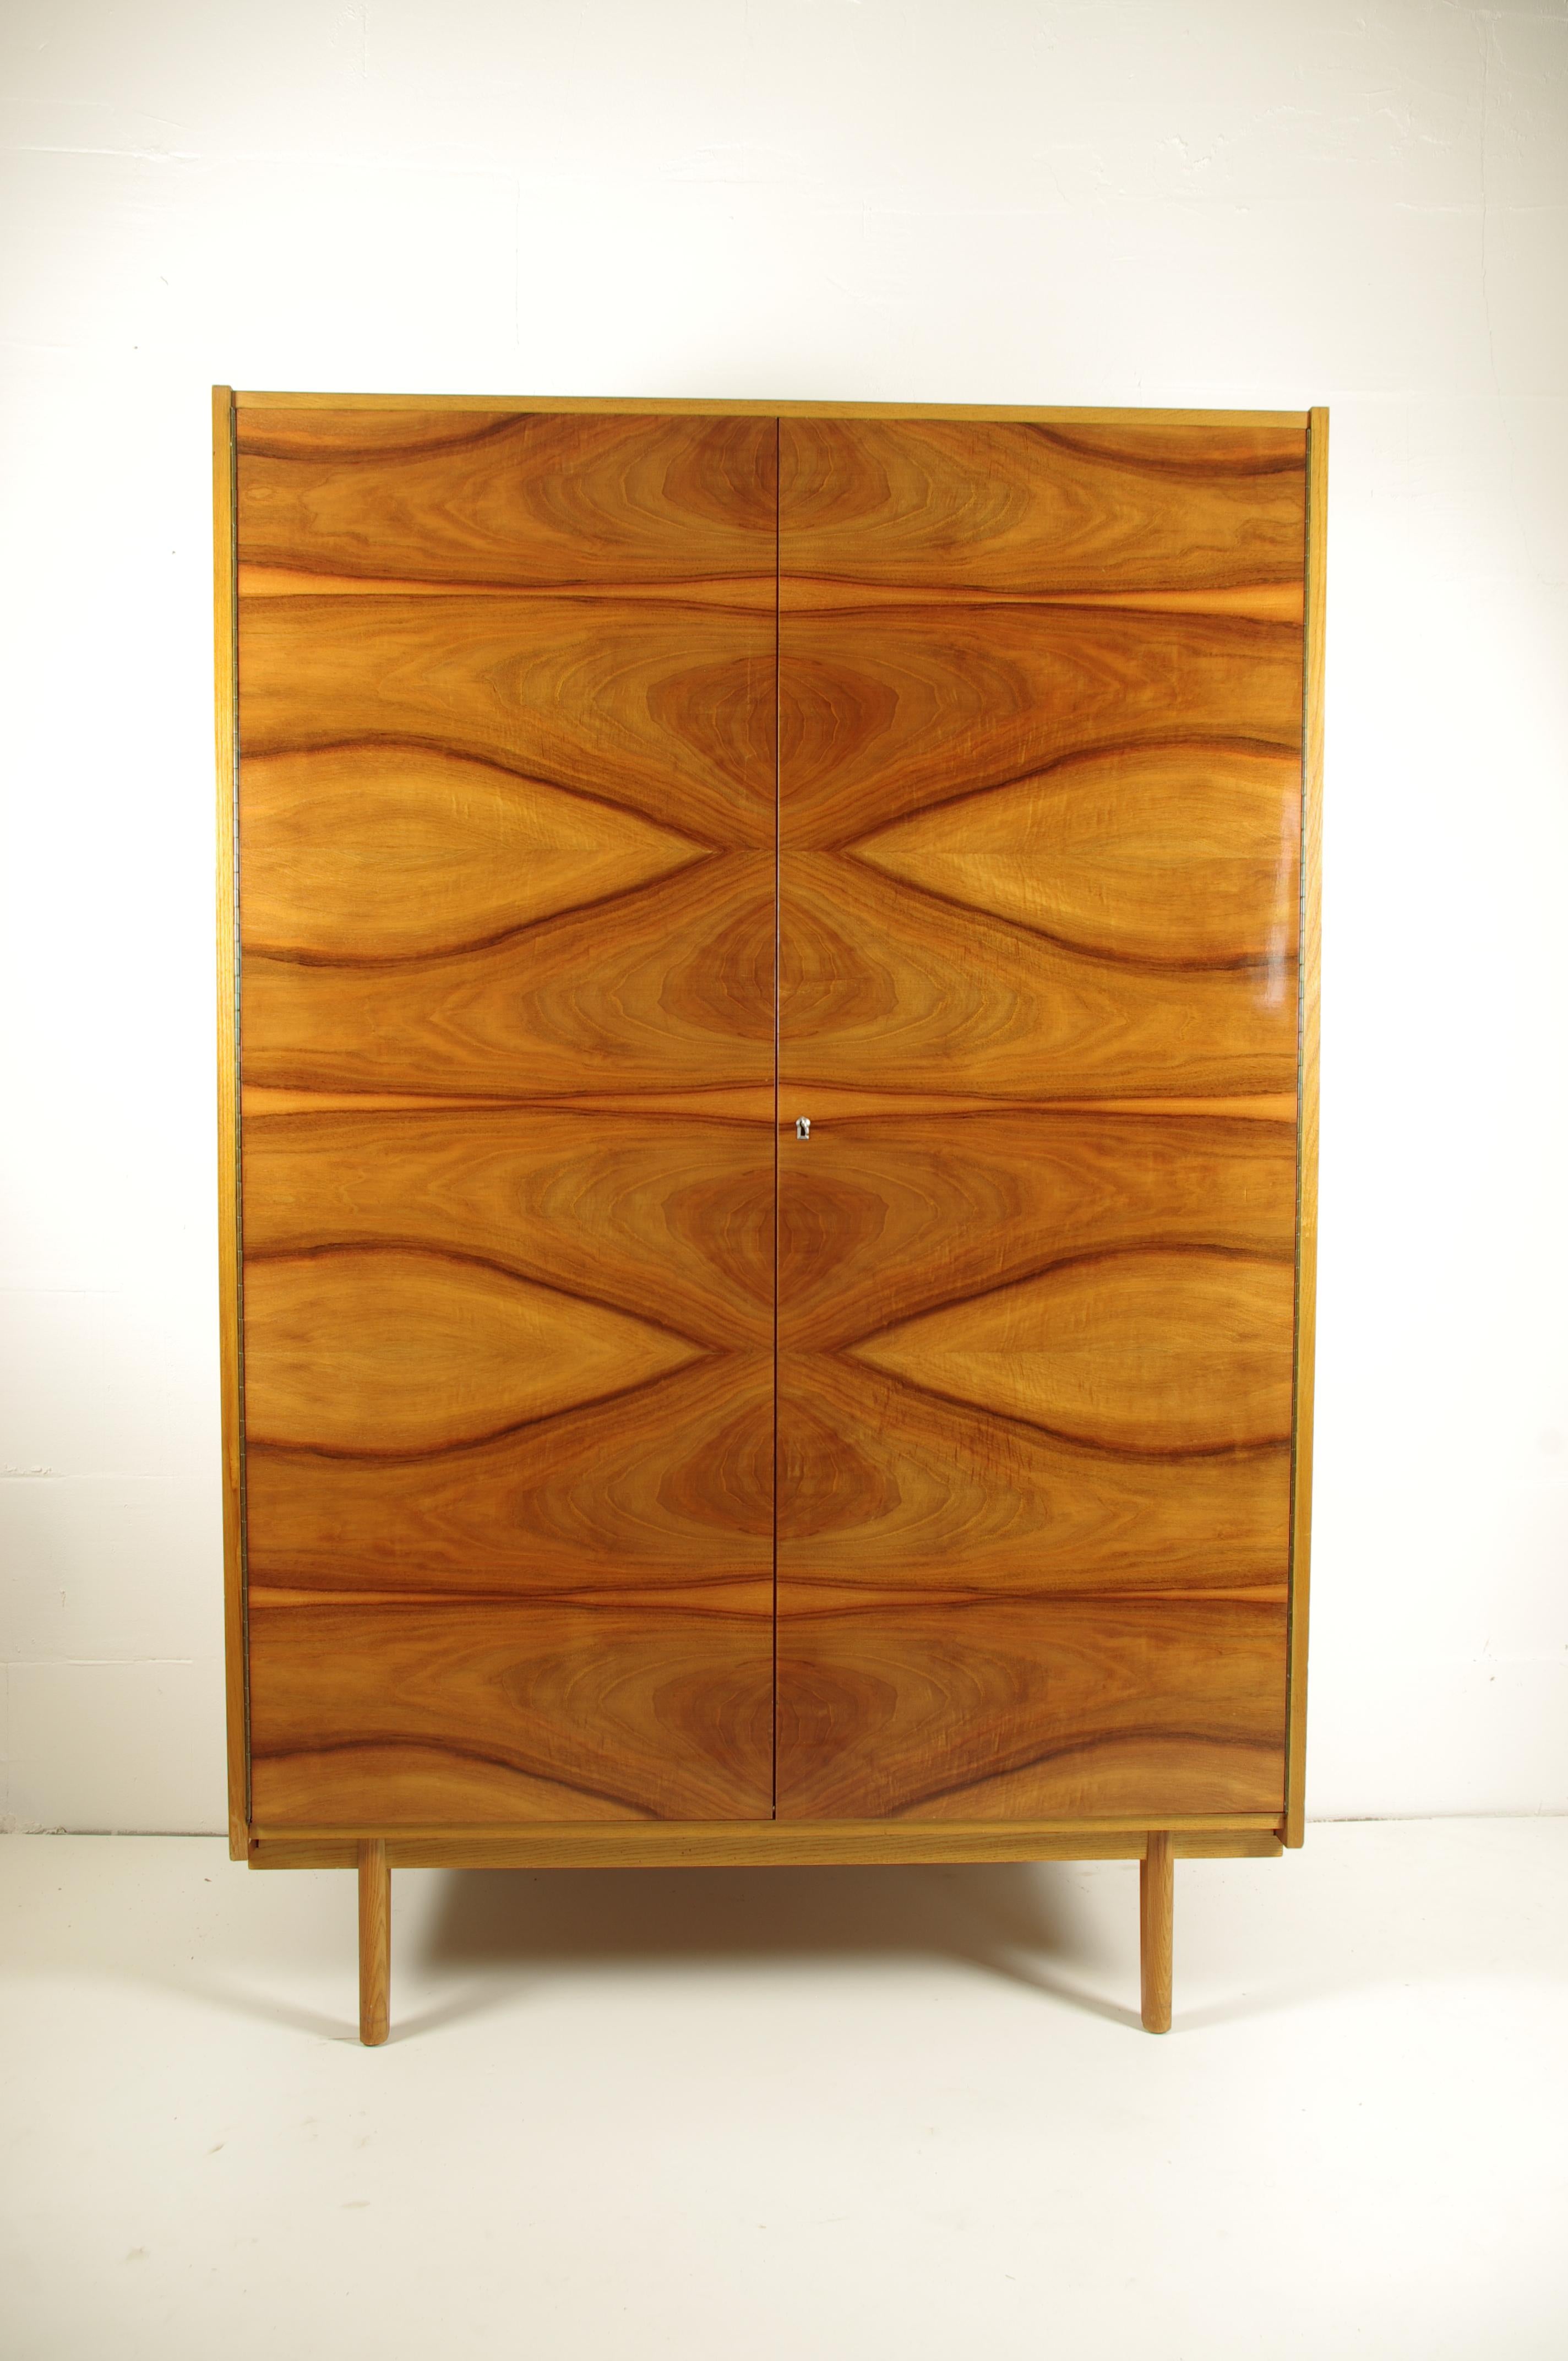 Made of wood and walnut veneer. The doors have high gloss finish. Manufactured by LIPA, Usti nad Labem, Czechoslovakia. Original, very preserved condition. Some sun fading on left side.